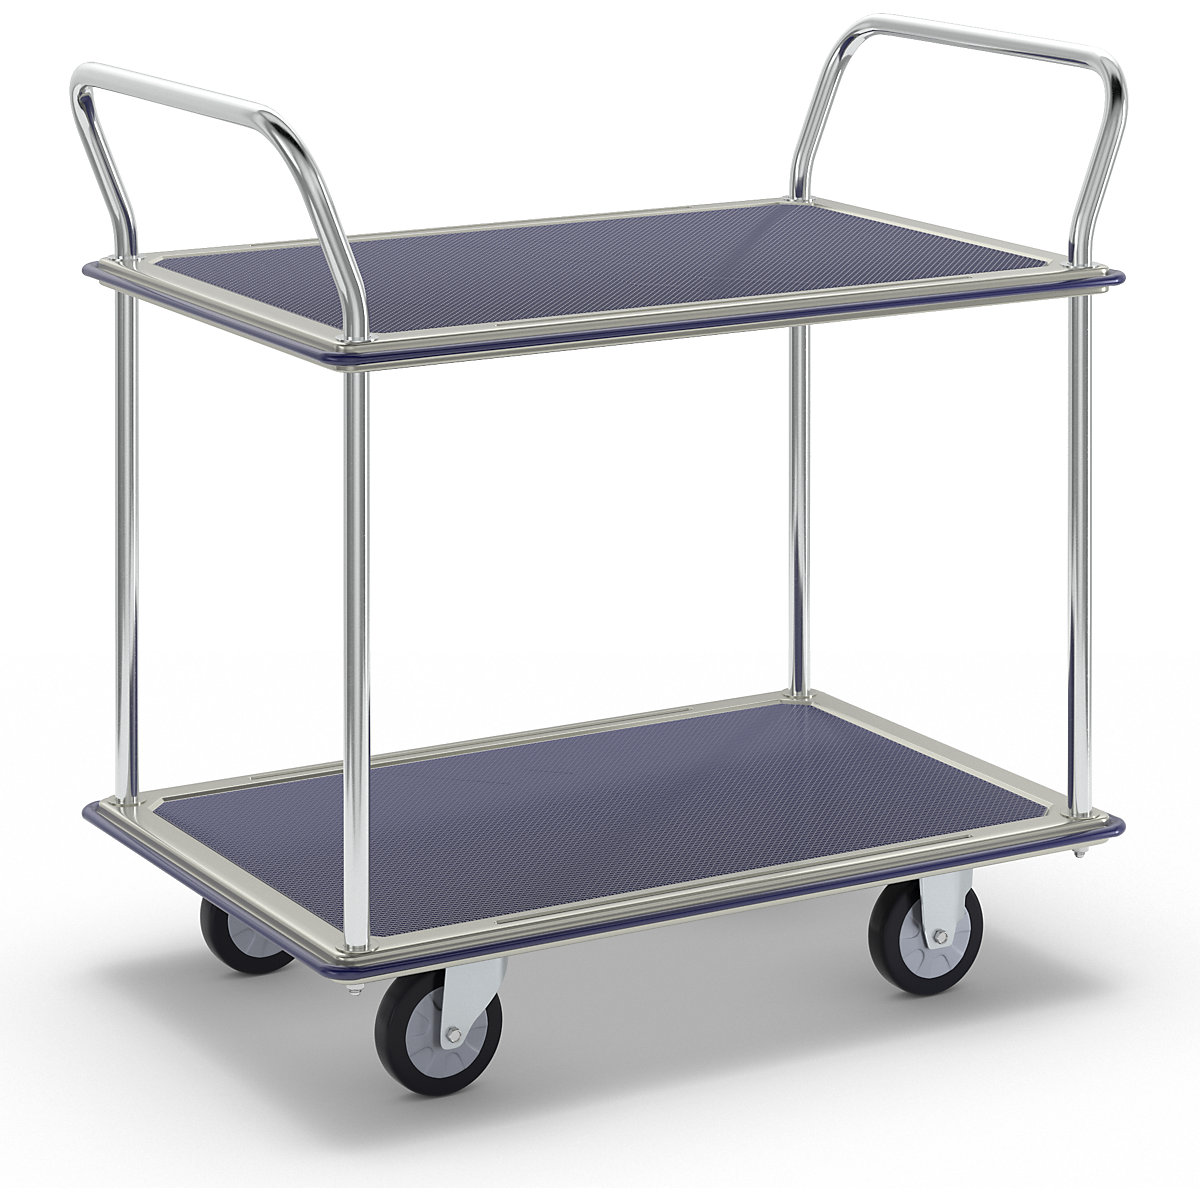 Table trolley chrome plated, 2 shelves with non-slip covering, 2 push handles, max. load 250 kg-10